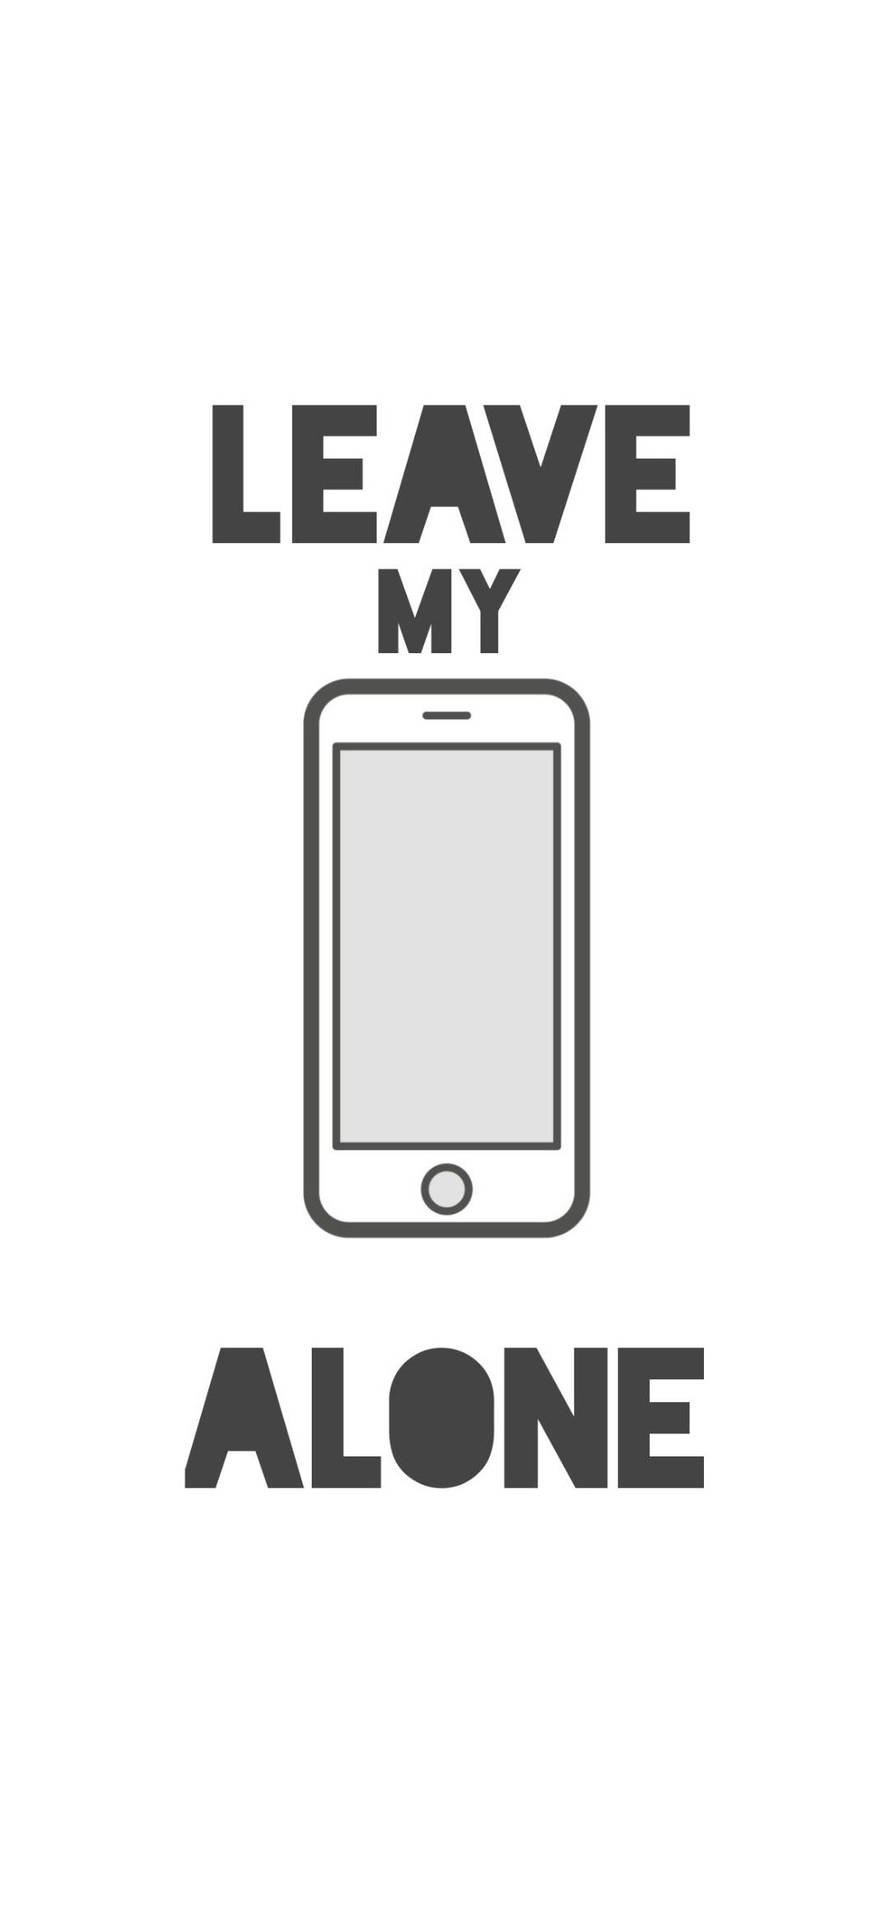 White Leave My Phone Alone Iphone Wallpaper